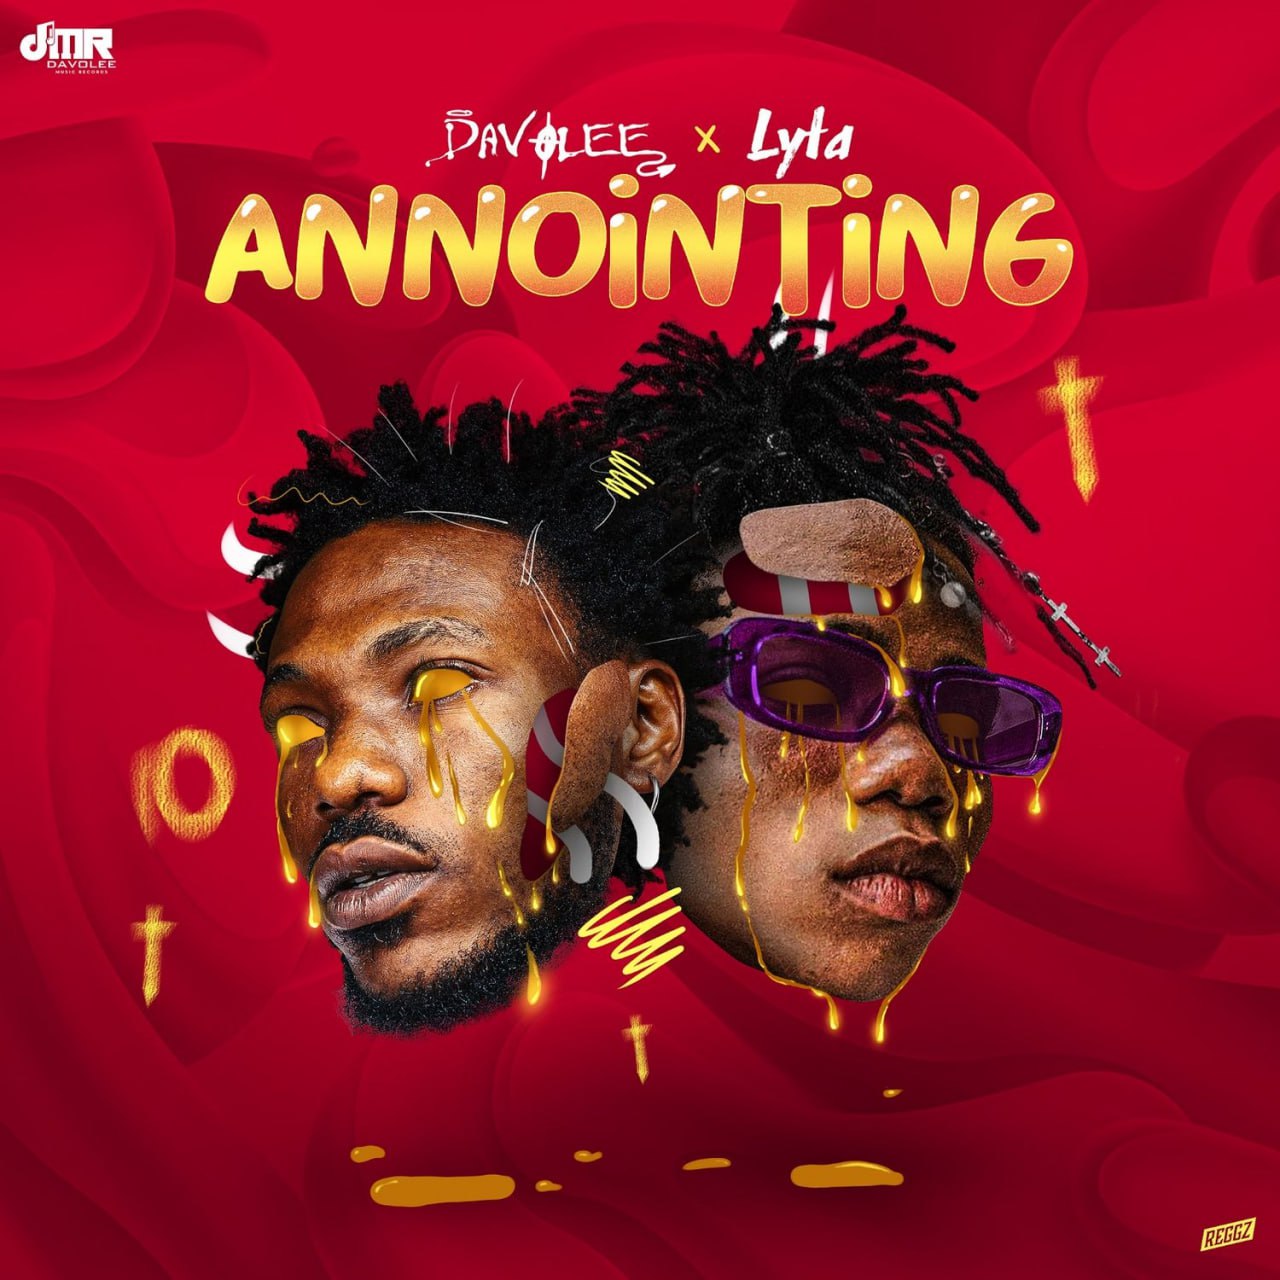 Annointing - Davolee ft. Lyta